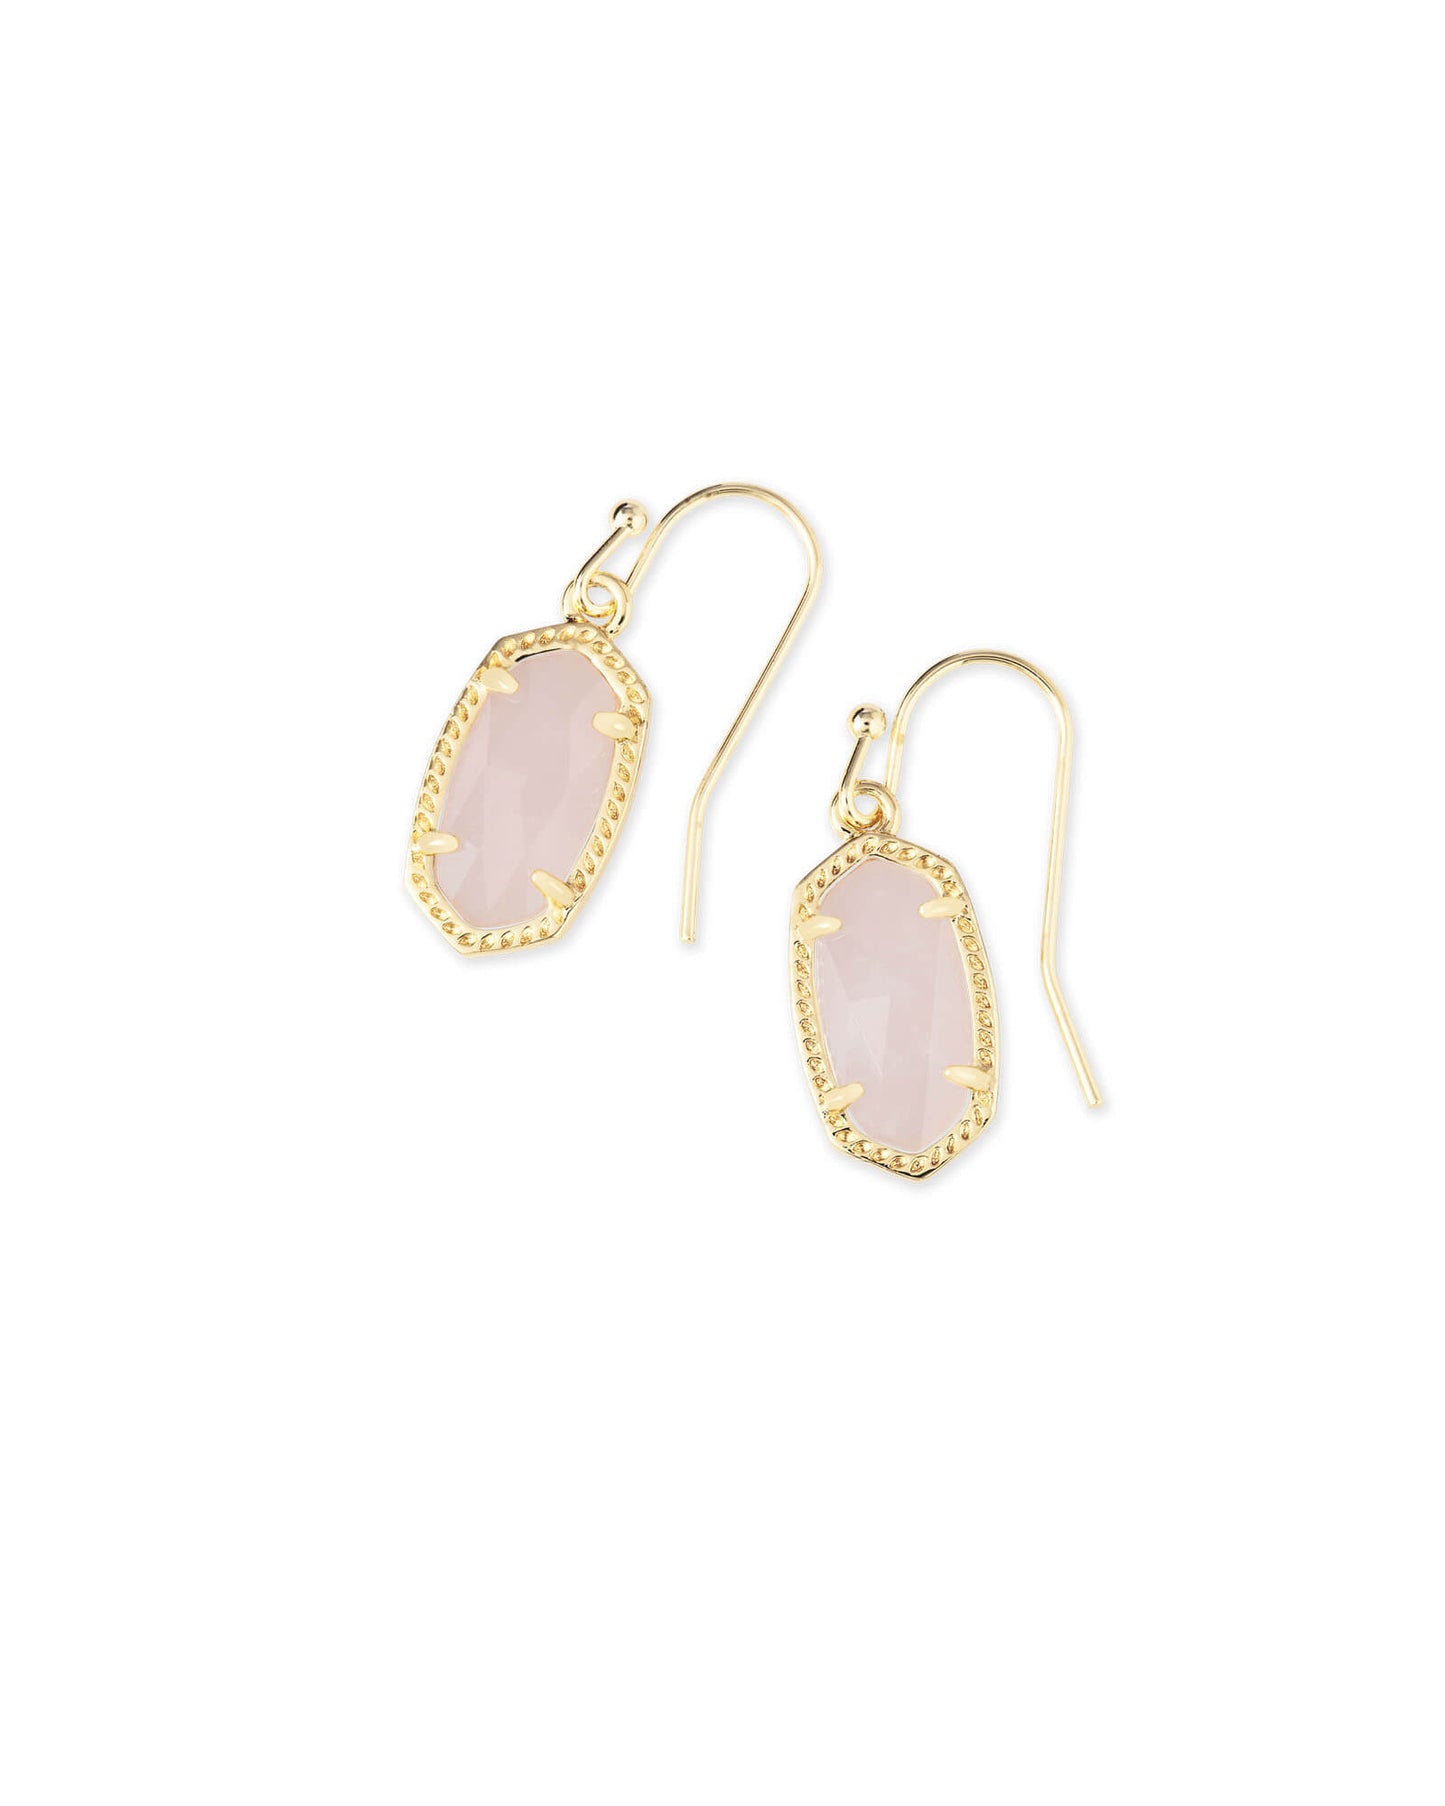 Our classic oval shape goes dainty in the Lee Drop Earrings, a subtle take on a signature style. These drop earrings are perfect for everyday wear, adding a touch of elegance to any outfit. We're certain that our Lee Drop Earrings will become a staple piece in your jewelry box.  Dimensions- 0.63'L x .38'W on ear wire Metal- 14k Yellow Gold Over Brass Closure- Fishhook rose quartz stone